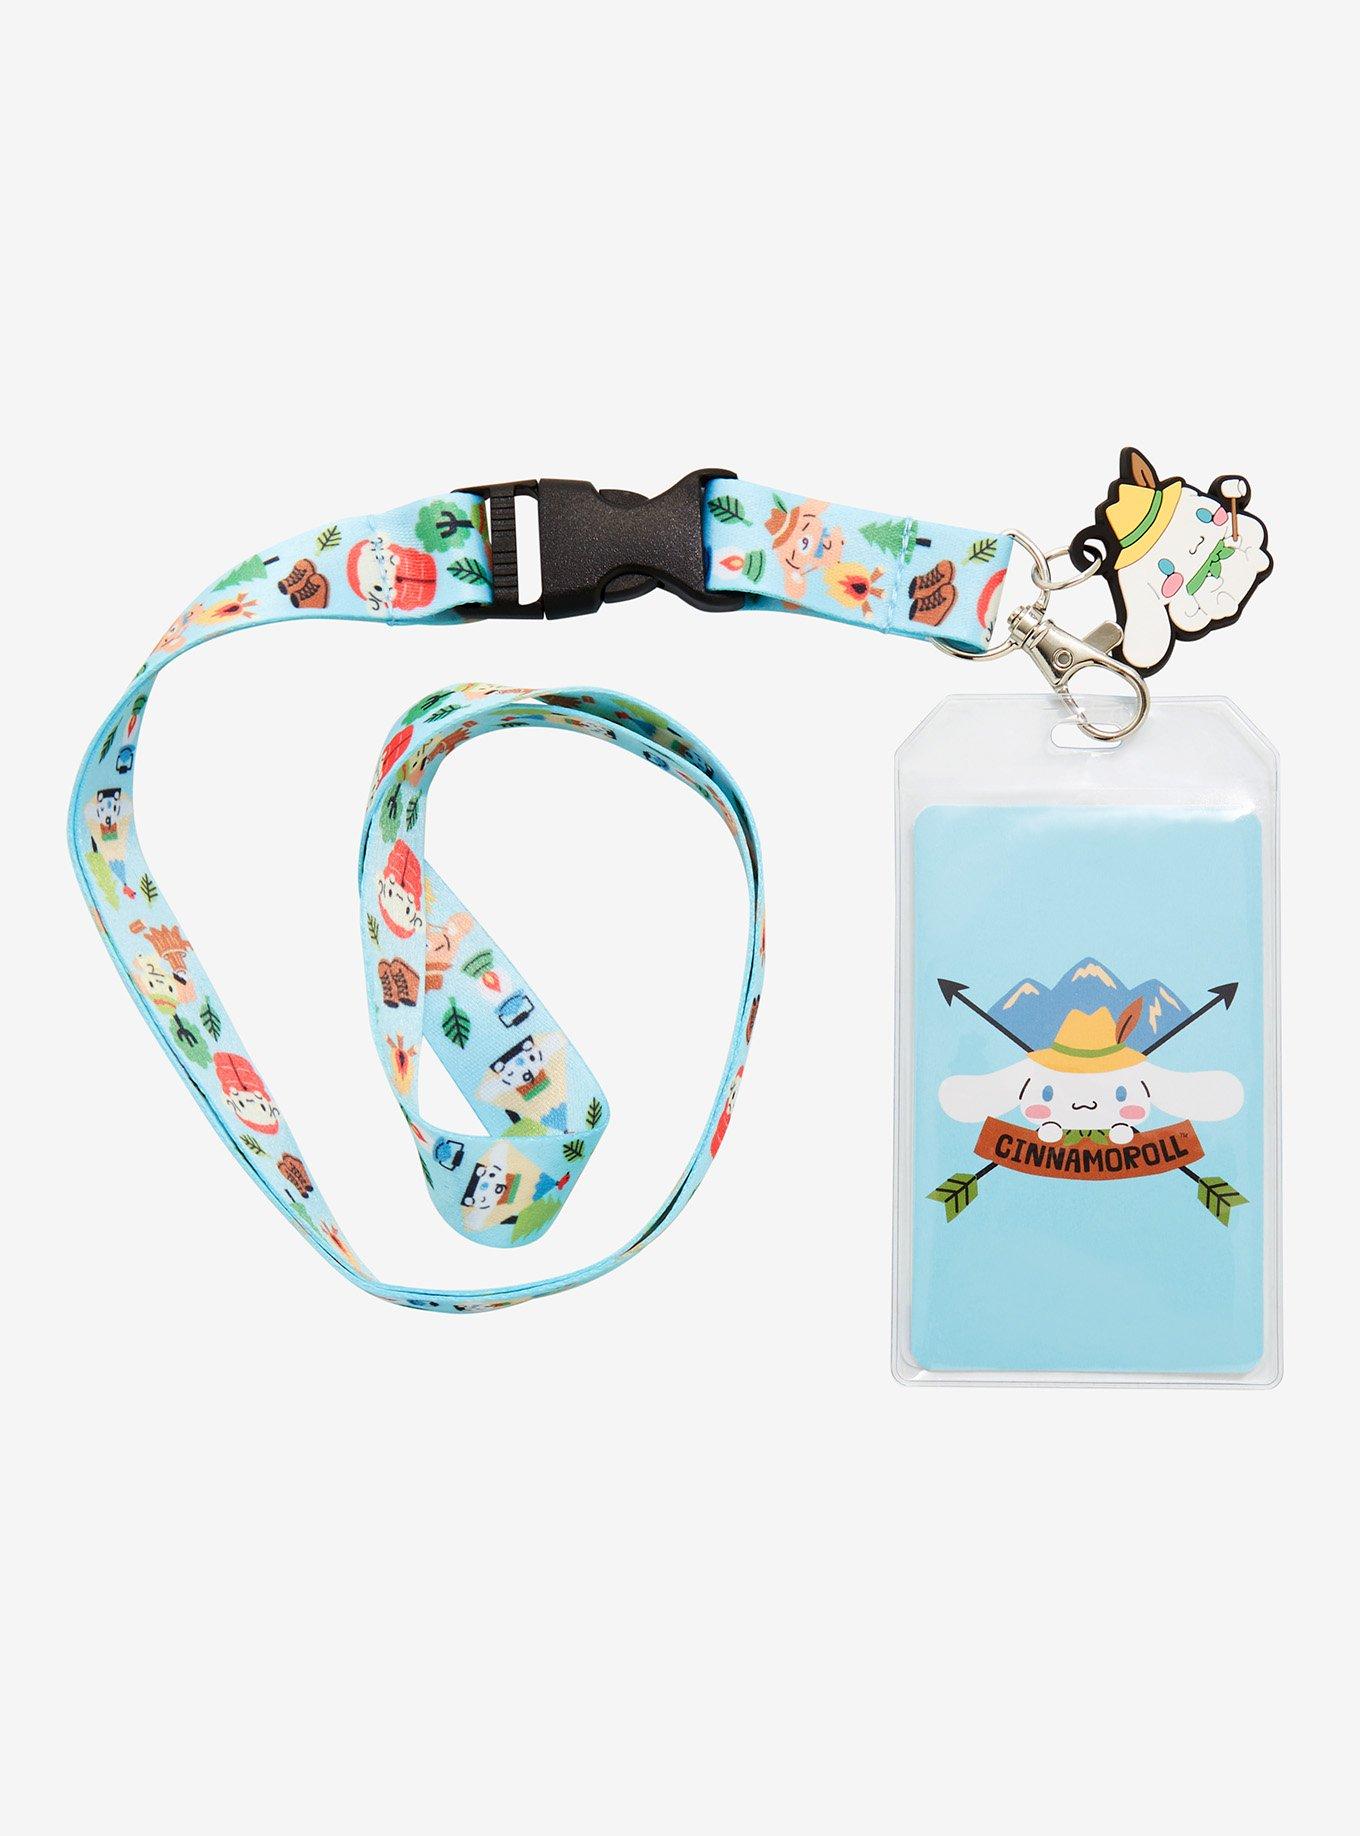  Superhero Spider Anime Lanyard with ID Card Badge Holder for  Movie Fans Wristlet for Keys Keychain Accessories (Spider 5) : Office  Products